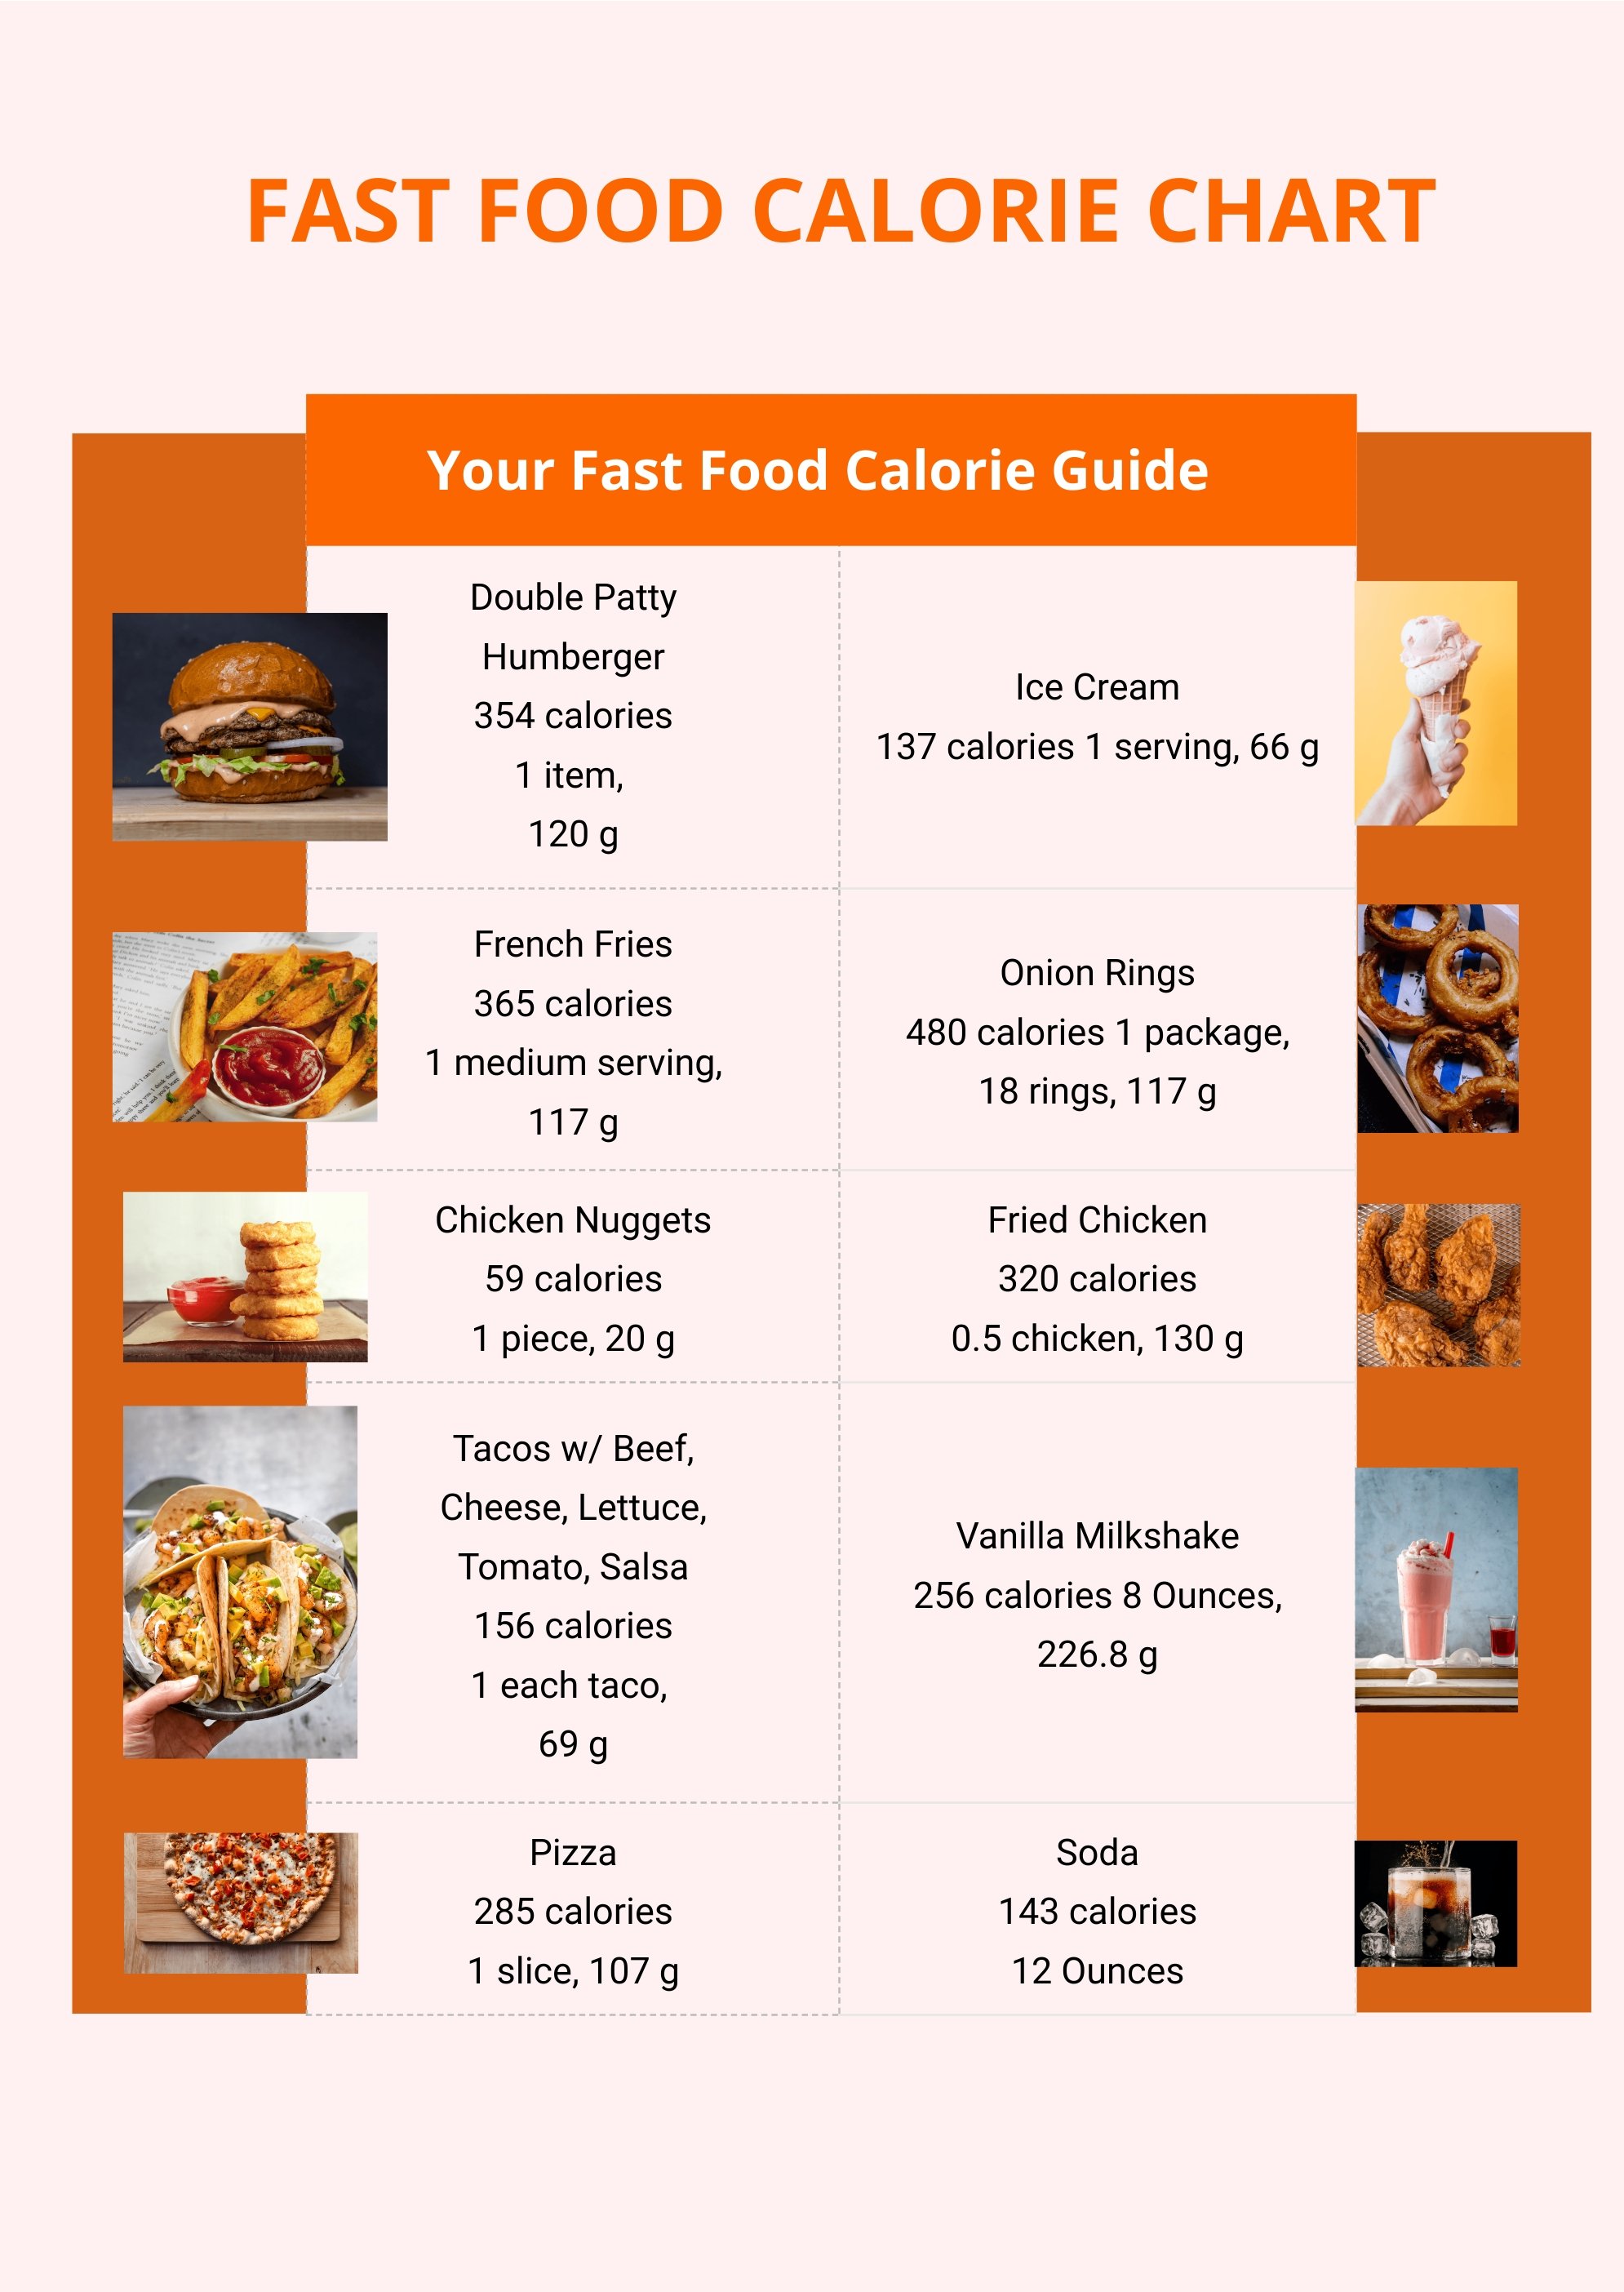 Fast Food Calorie Chart in PDF, Illustrator